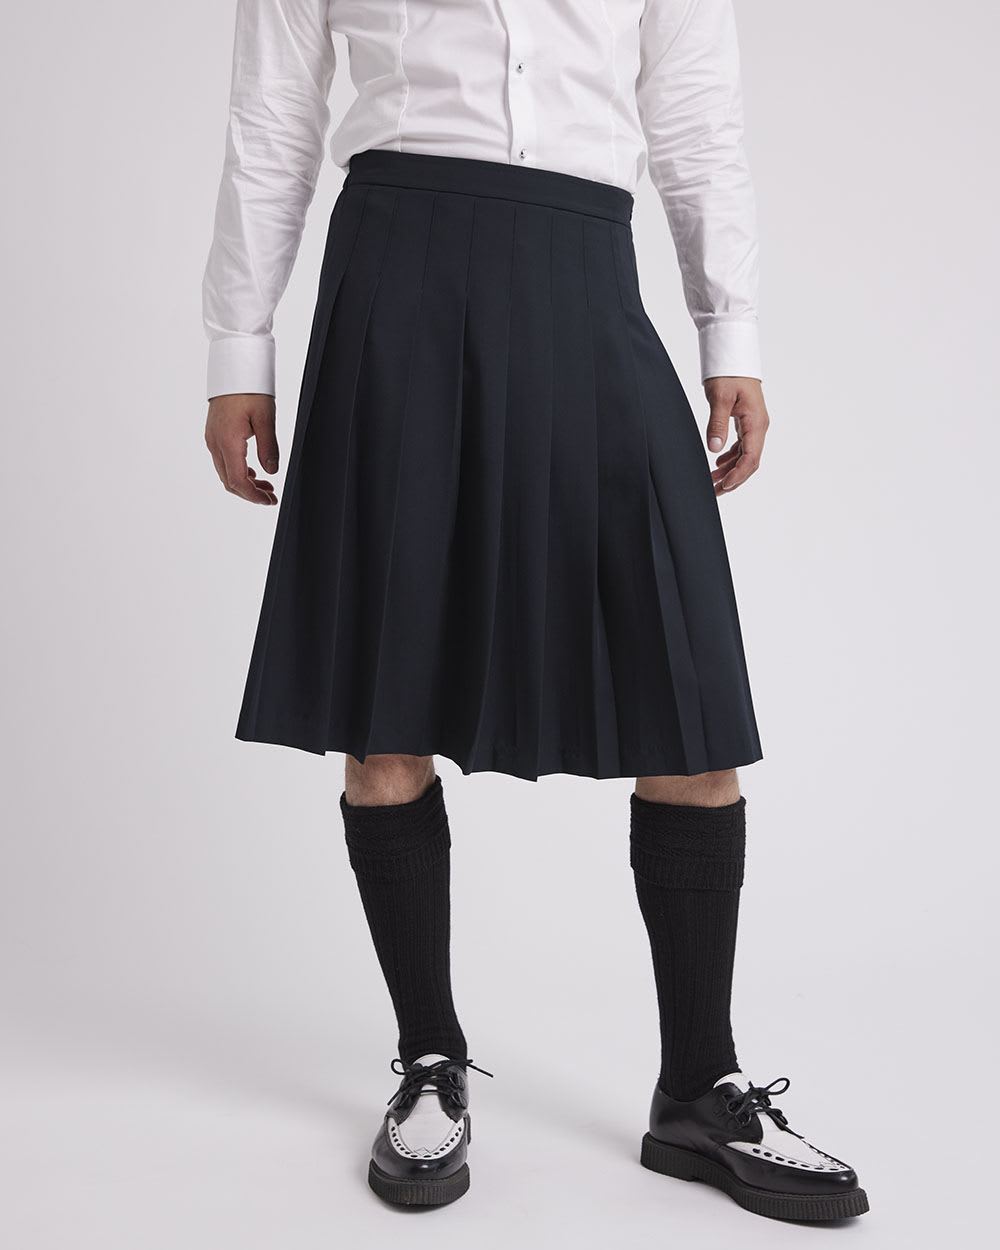 Gender-Neutral Pleated Skirt | RW&CO.